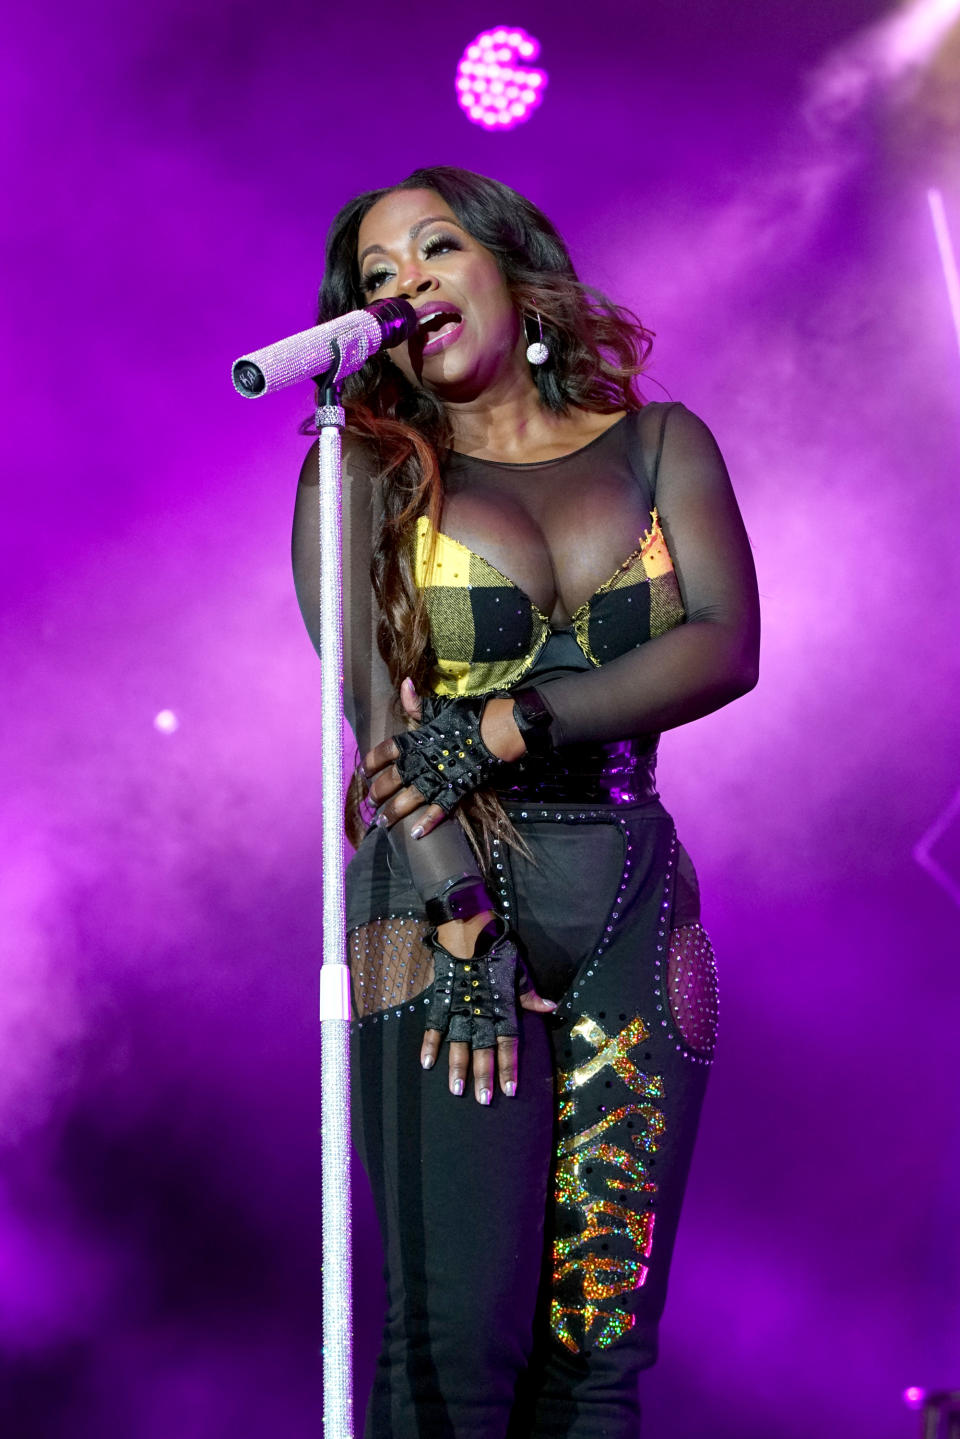 NEW ORLEANS, LA – JULY 07: Kandi Burruss of Xscape performs onstage during the 2018 Essence Festival presented By Coca-Cola – Day 2 at Louisiana Superdome on July 7, 2018 in New Orleans, Louisiana. (Photo by Bennett Raglin/Getty Images for Essence)